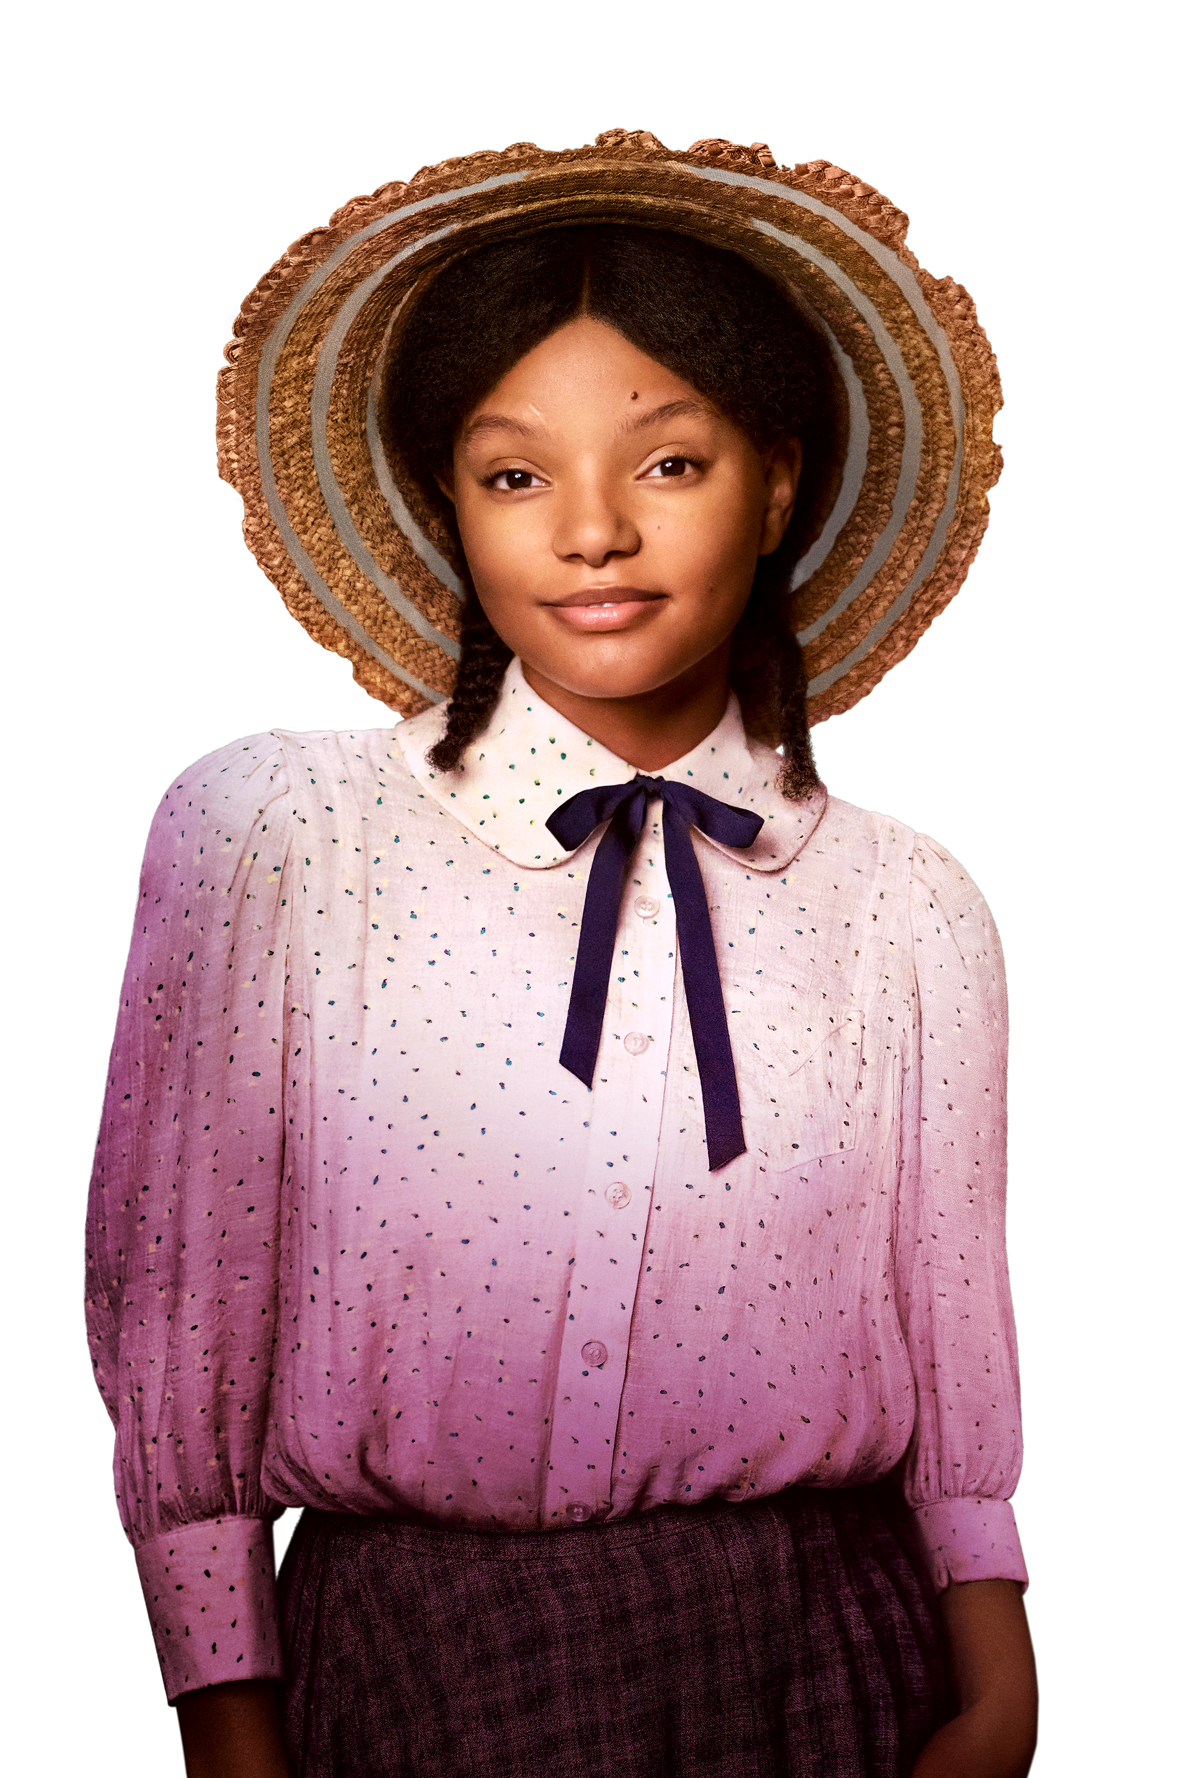 Halle Bailey as Young Nettie